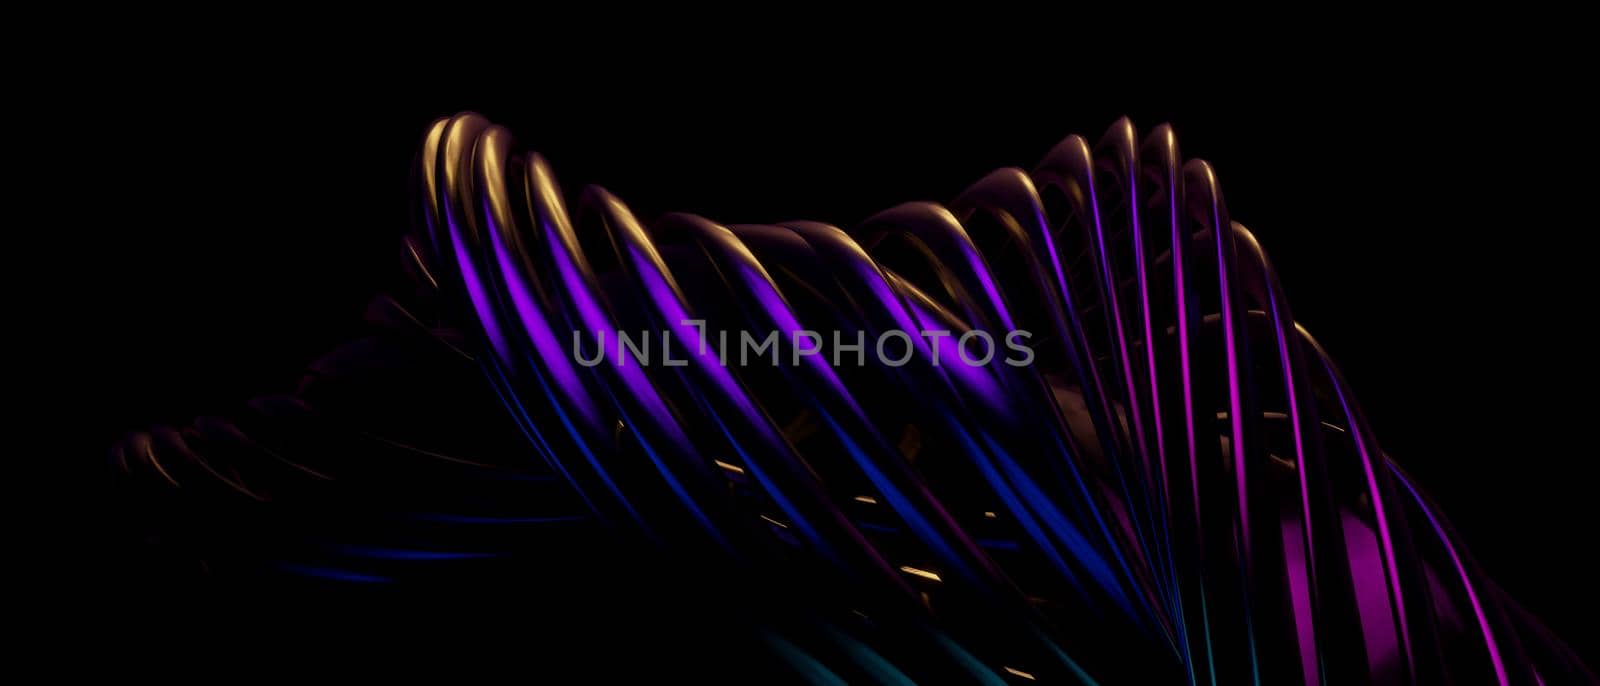 Magical Abstract Neon Irridescent BluePurple Abstract Background 3D Illustration